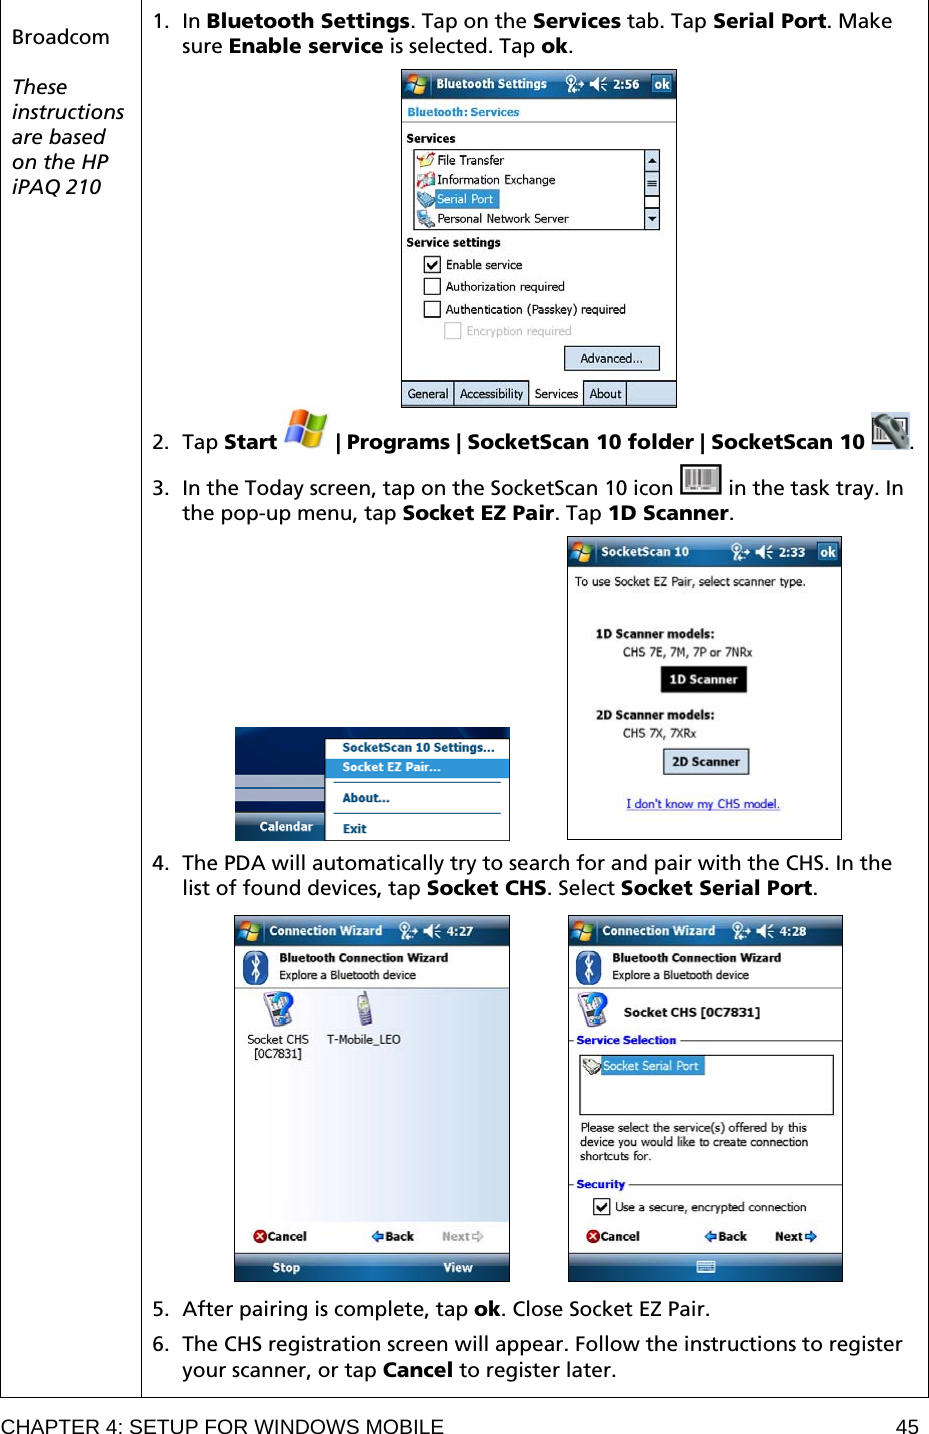 CHAPTER 4: SETUP FOR WINDOWS MOBILE  45  Broadcom  These instructions are based on the HP iPAQ 210  1. In Bluetooth Settings. Tap on the Services tab. Tap Serial Port. Make sure Enable service is selected. Tap ok.   2. Tap Start   | Programs | SocketScan 10 folder | SocketScan 10  .  3. In the Today screen, tap on the SocketScan 10 icon   in the task tray. In the pop-up menu, tap Socket EZ Pair. Tap 1D Scanner.               4. The PDA will automatically try to search for and pair with the CHS. In the list of found devices, tap Socket CHS. Select Socket Serial Port.               5. After pairing is complete, tap ok. Close Socket EZ Pair.  6. The CHS registration screen will appear. Follow the instructions to register your scanner, or tap Cancel to register later.  